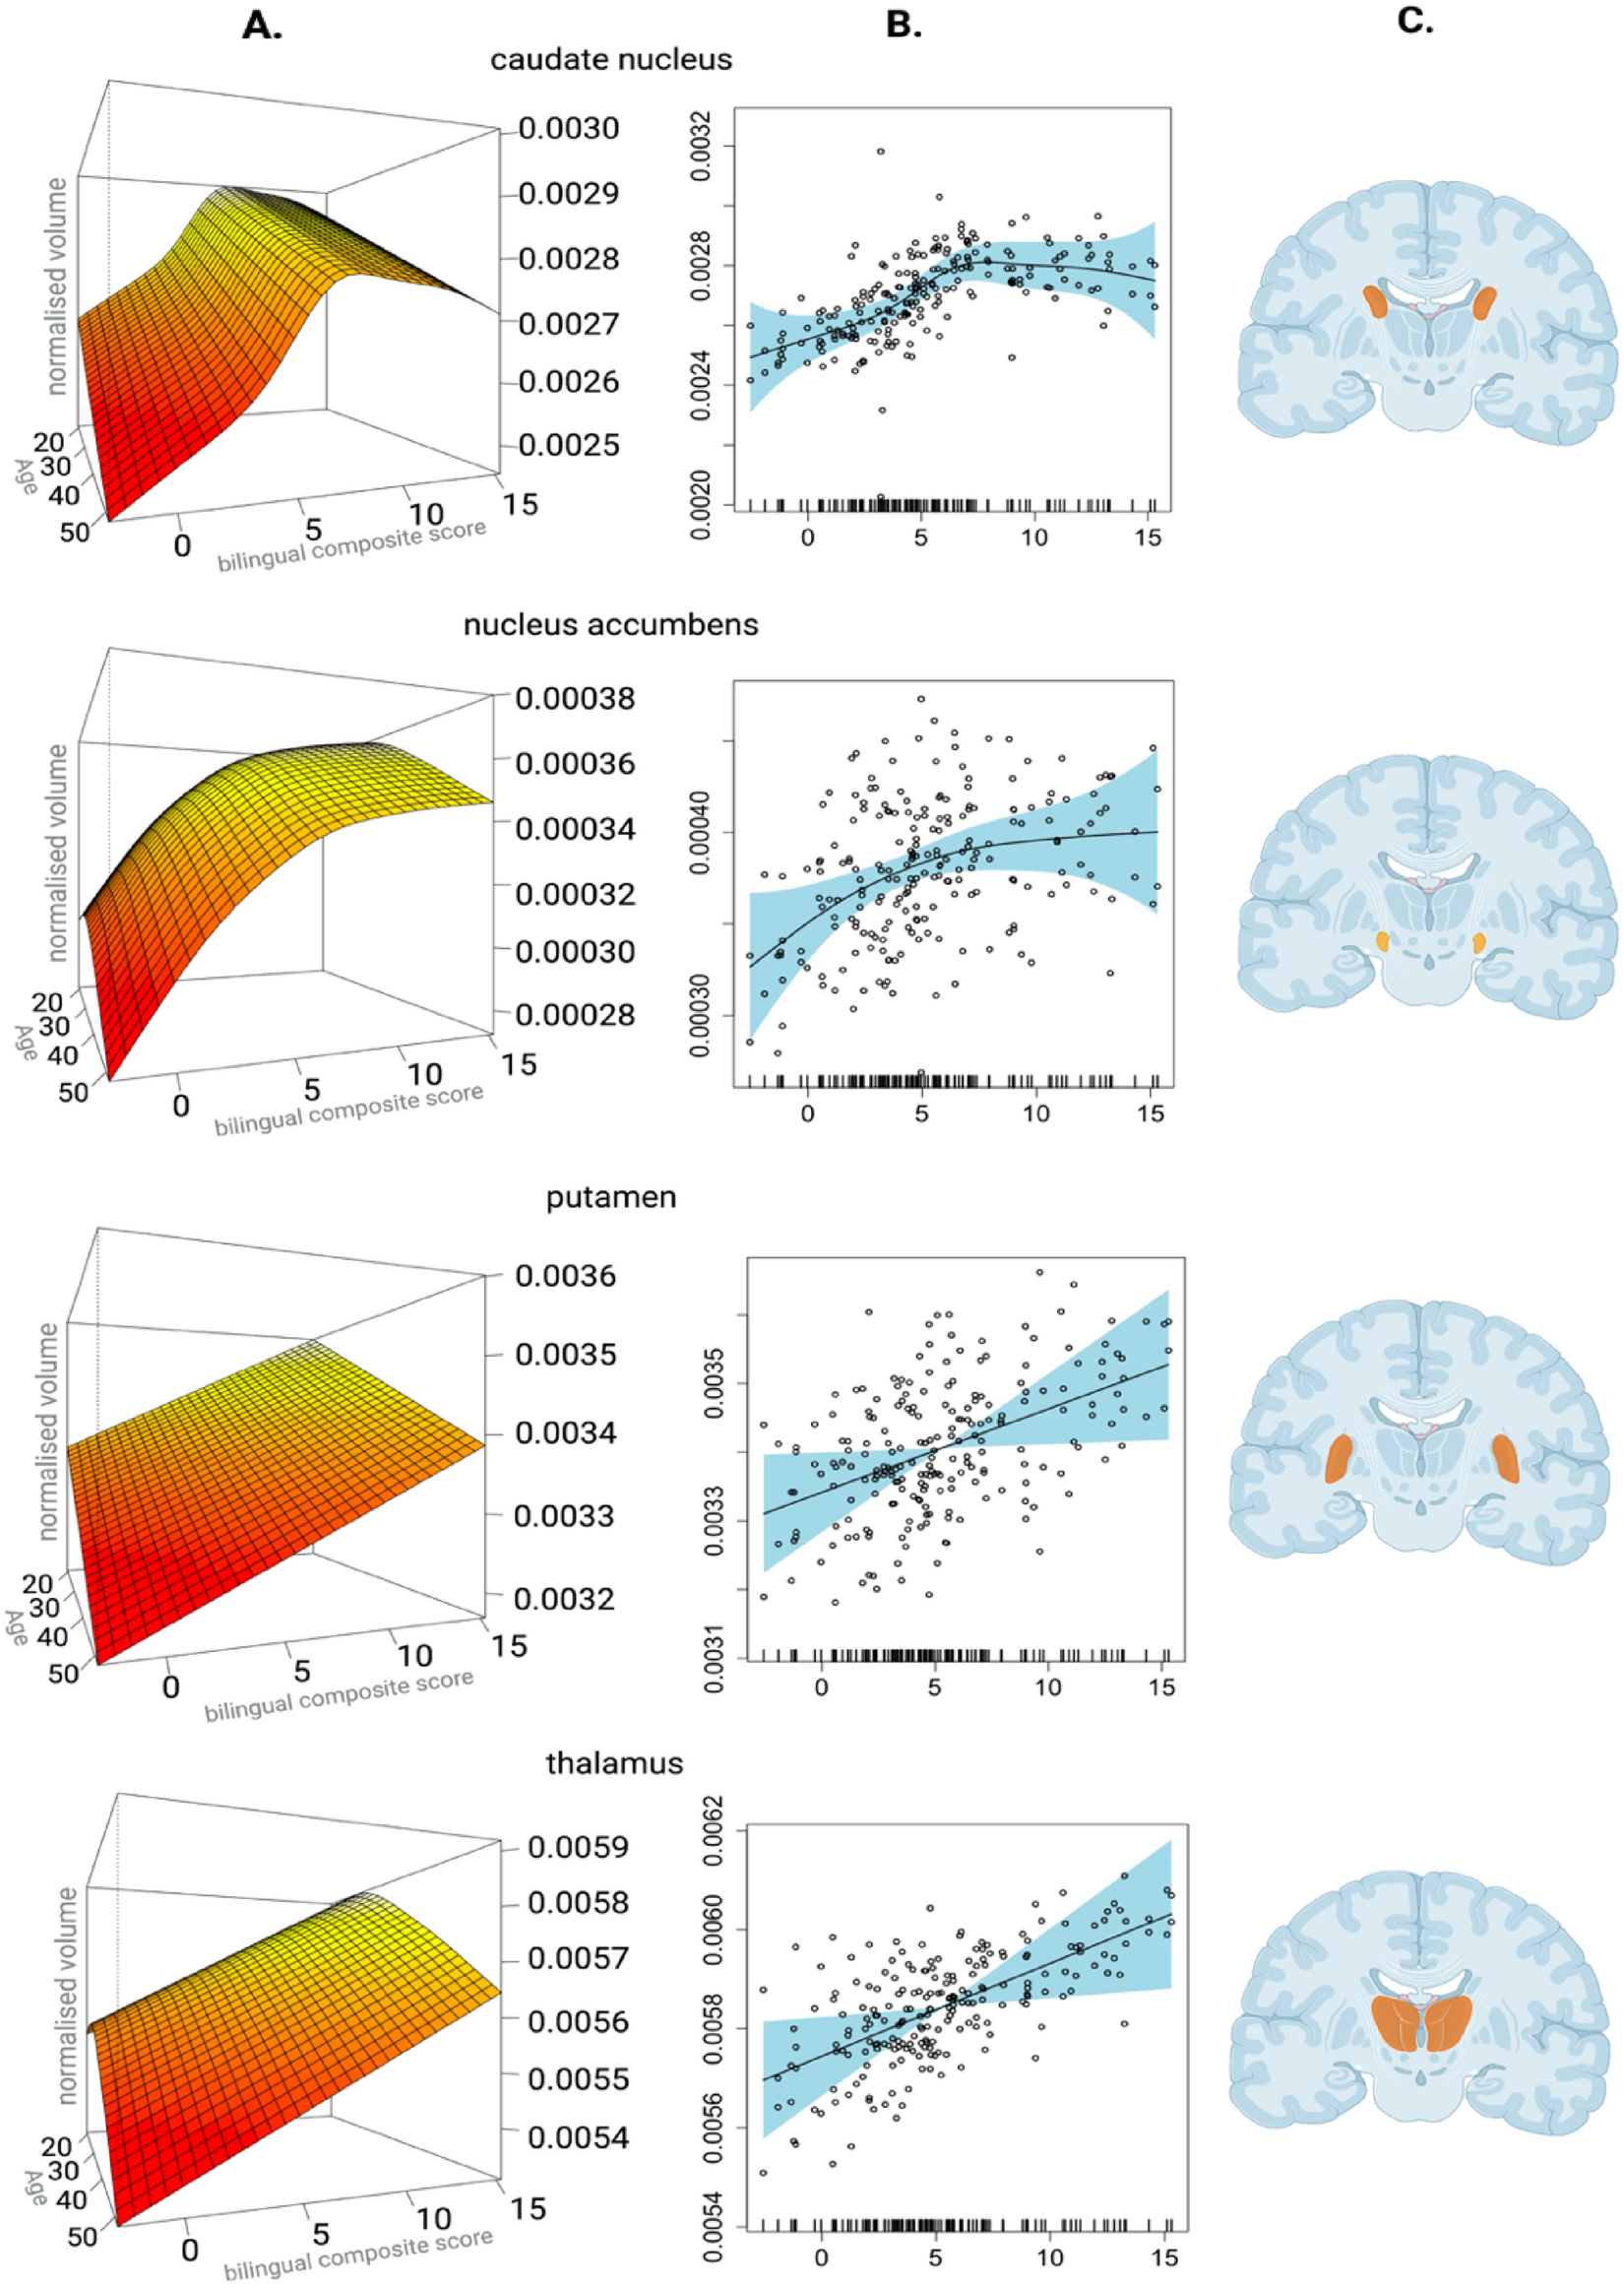 Dynamic effects of bilingualism on brain structure map onto general  principles of experience-based neuroplasticity